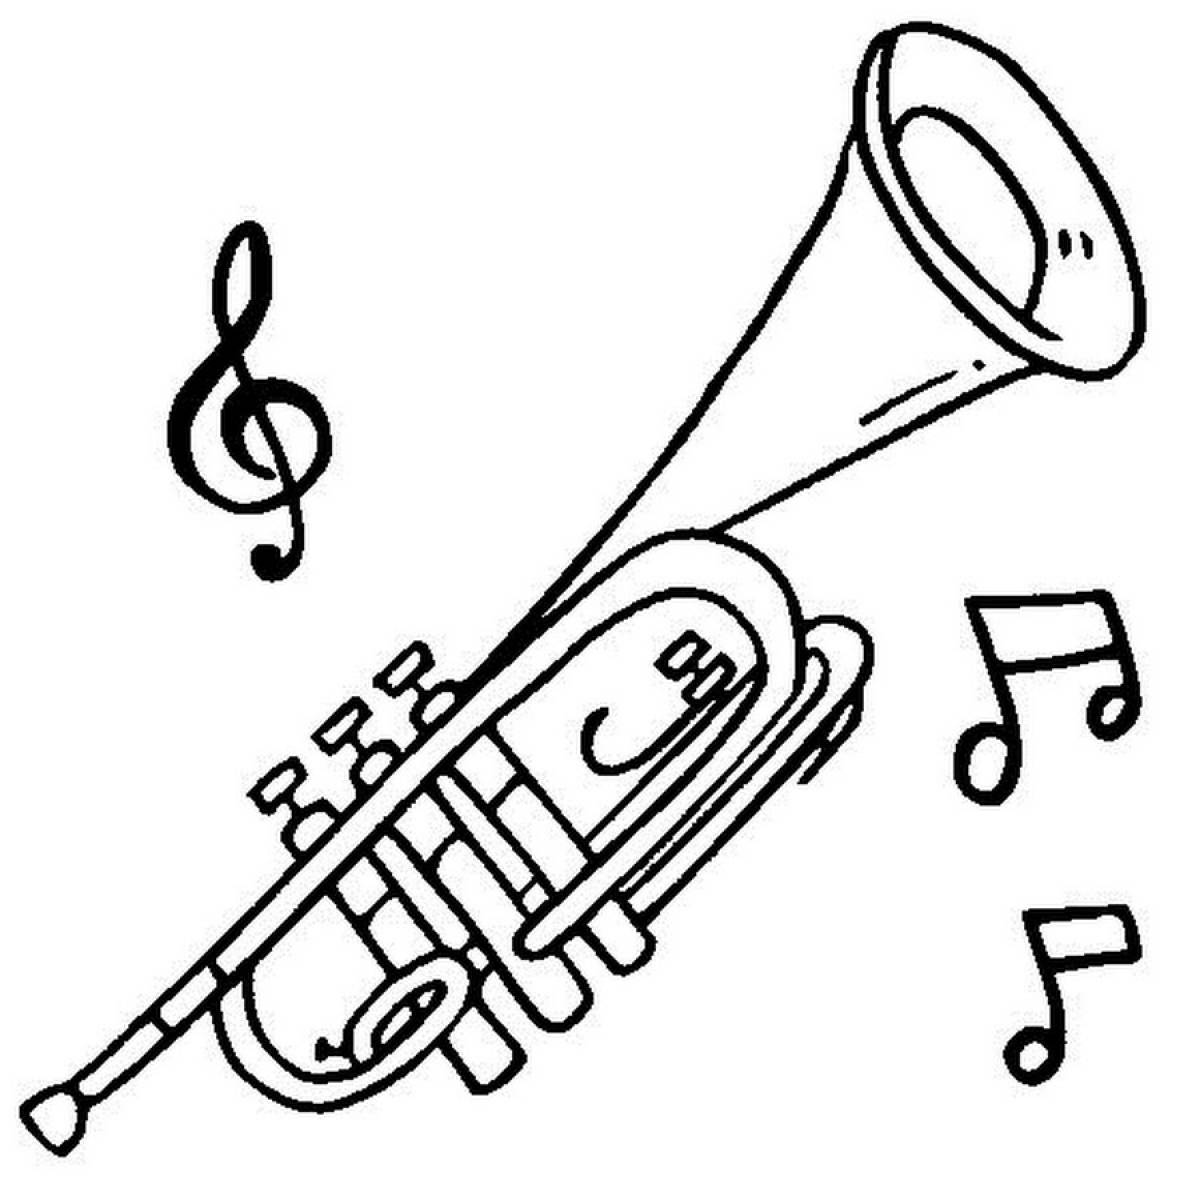 Trumpet and sheet music coloring page